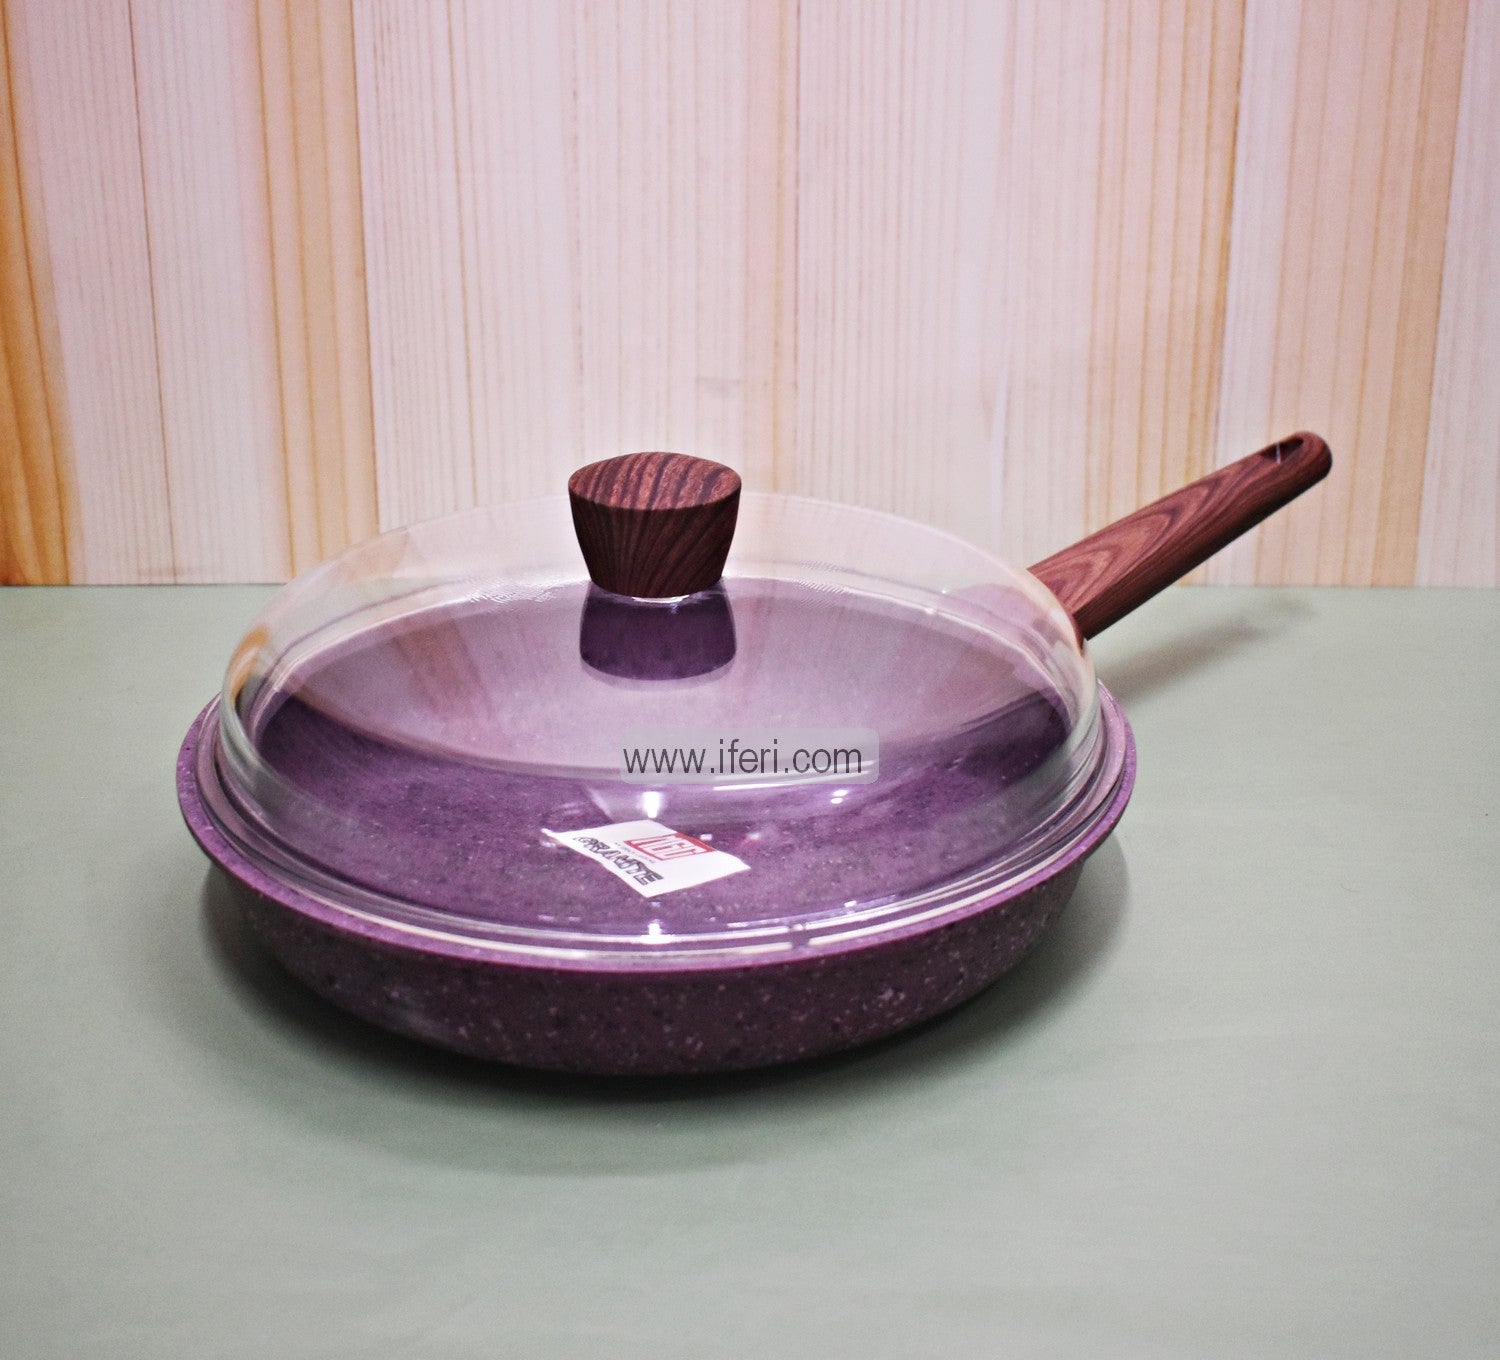 28cm MGC Non-Stick Granite Coated Pan With Lid RH1873